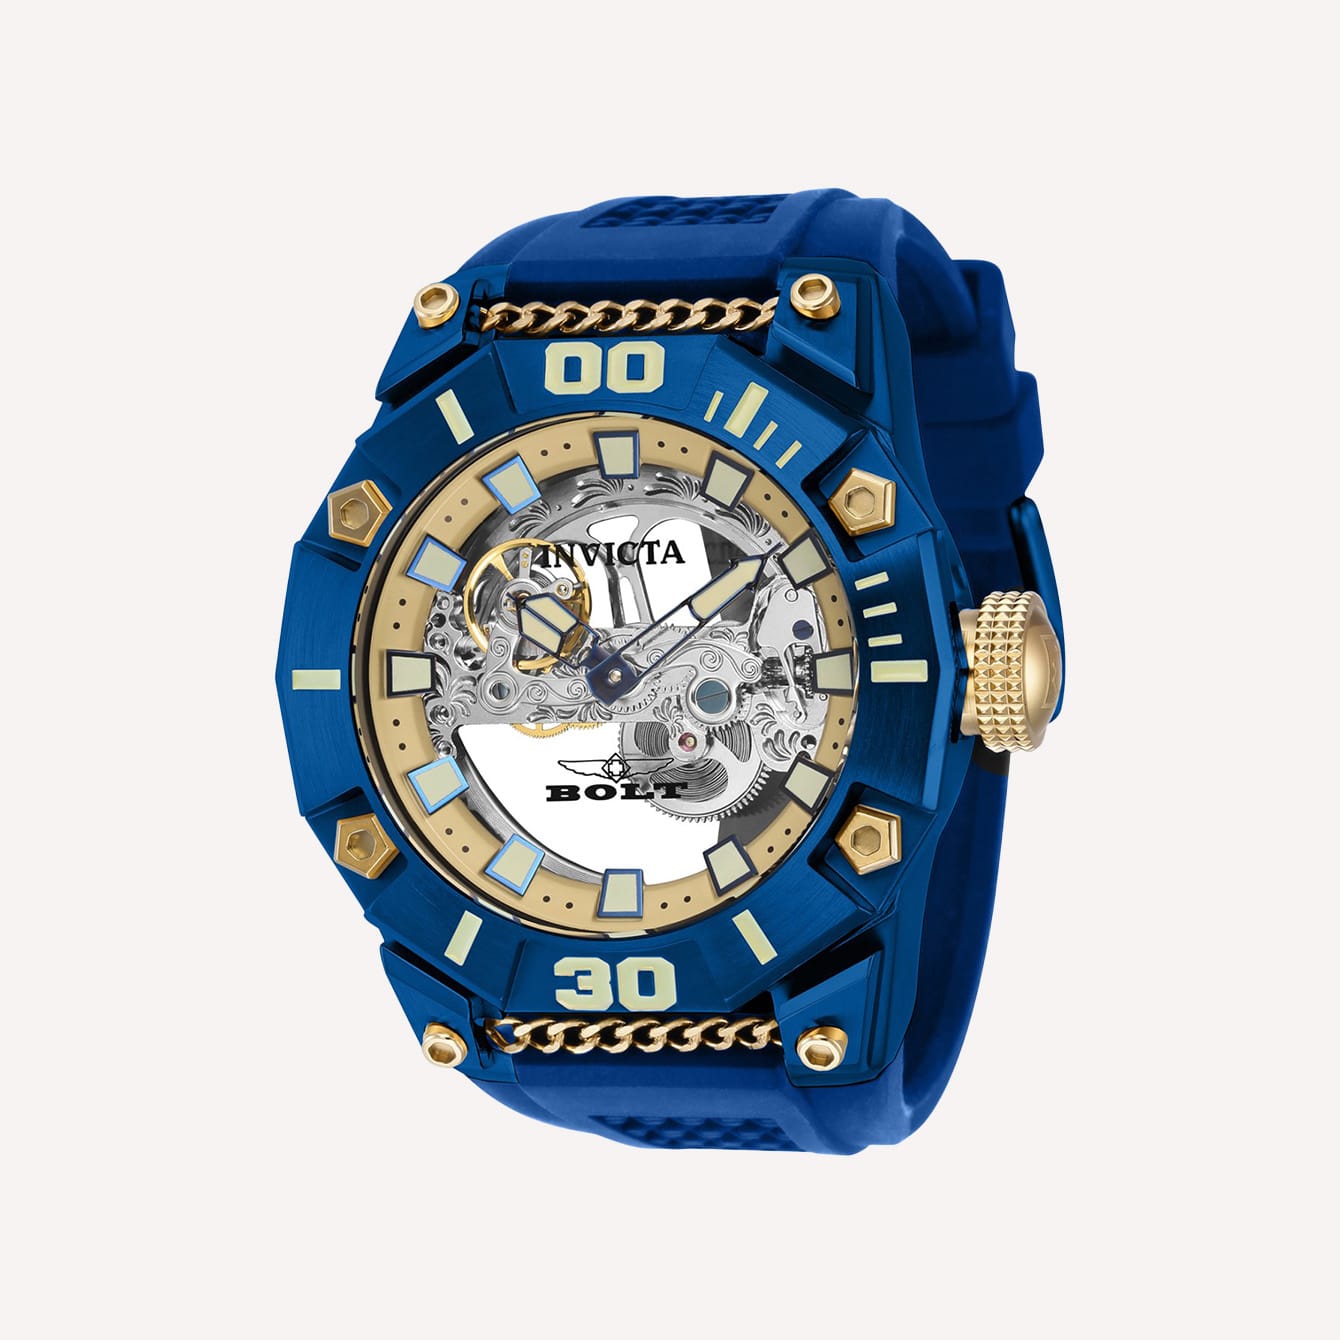 12 Best Invicta Watches (Invicta Watch Buying Guide)-12